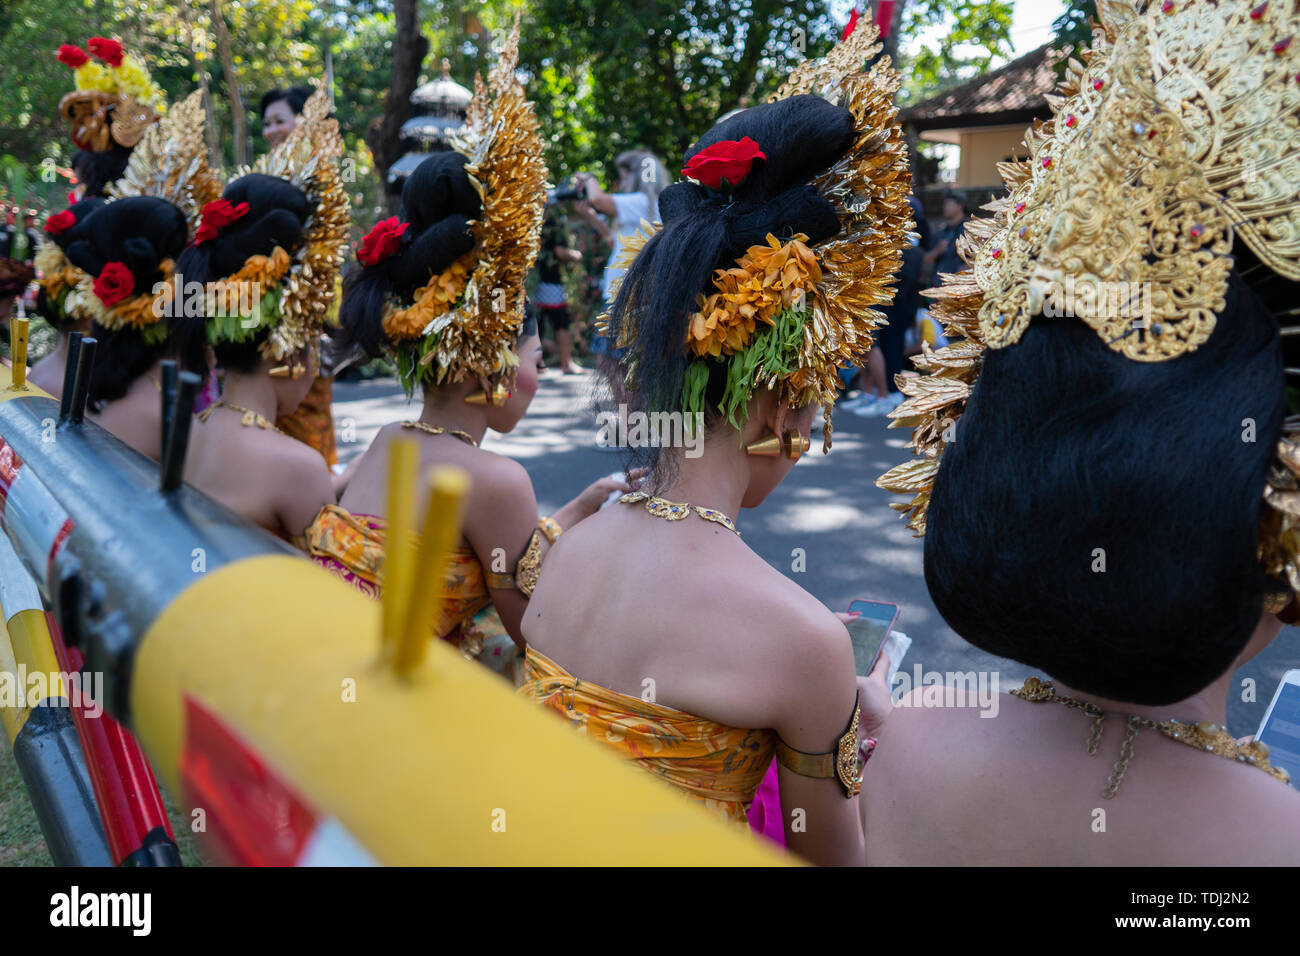 Young Balinese women wearing traditional Balinese headdress and traditional sarong at the opening ceremony of the Bali Art Festival 2019. Stock Photo